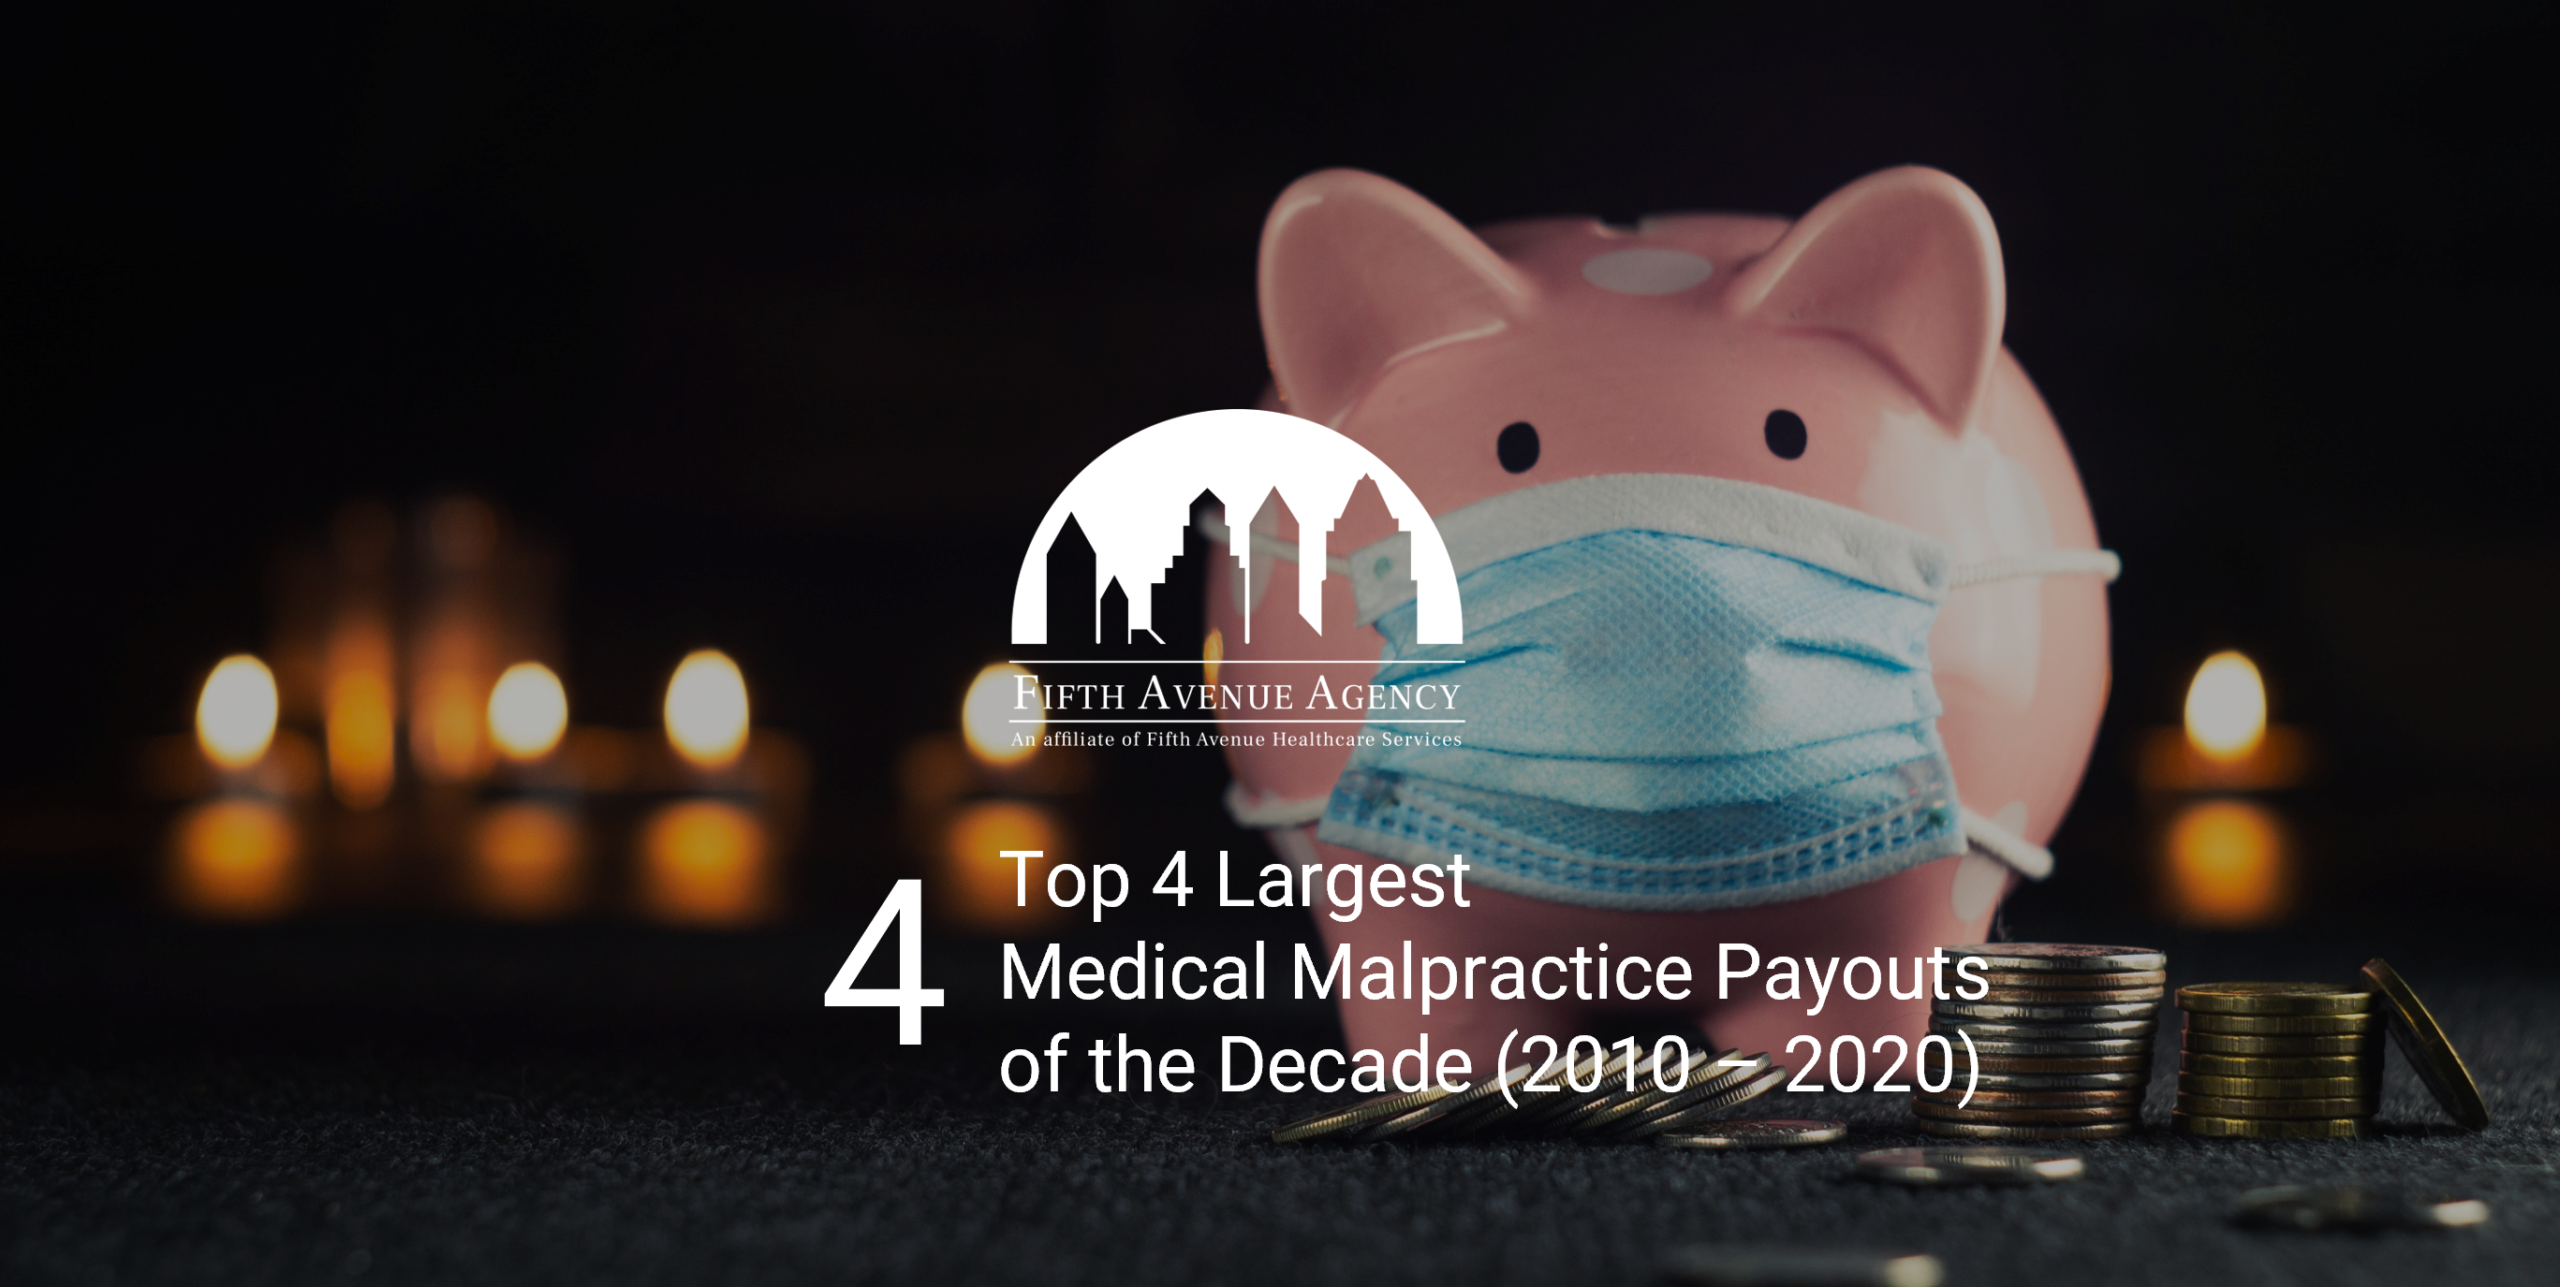 Medical Malpractice FifthAvenueAgency.com 4 Largest Medical Malpractice Payouts